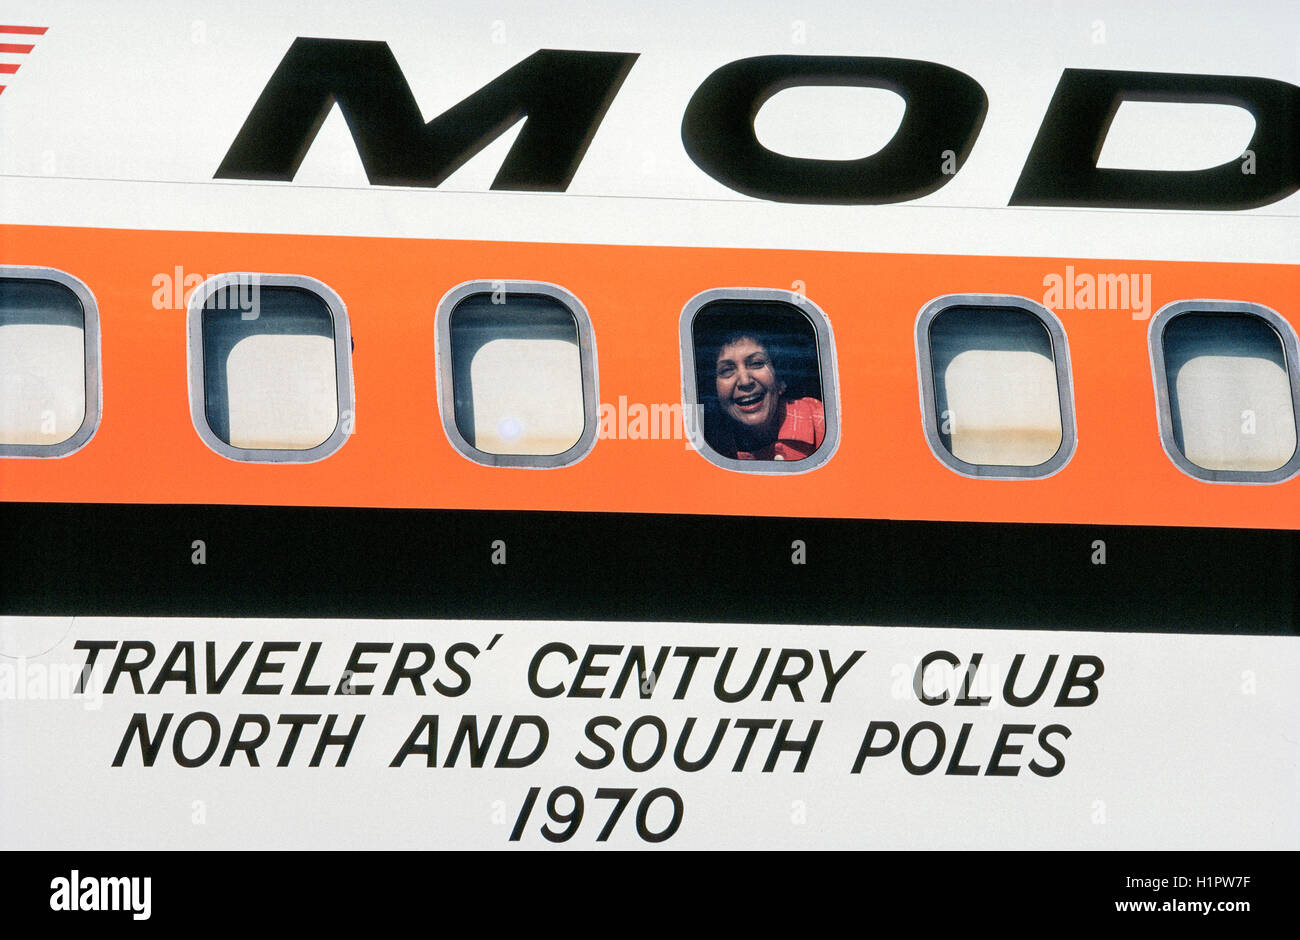 A passenger looks out the window of a Convair 990 jet that was a Modern Air Transport charter called "Polar Bird II."  The plane carried 48 passengers via the North Pole and South Pole on a unique 32-day around-the-world tour organized by Hemphill World Air Cruises of Los Angeles, California, for the Travelers' Century Club. It was the most expensive world tour of the time (1970) at $9,760 per person. Stock Photo